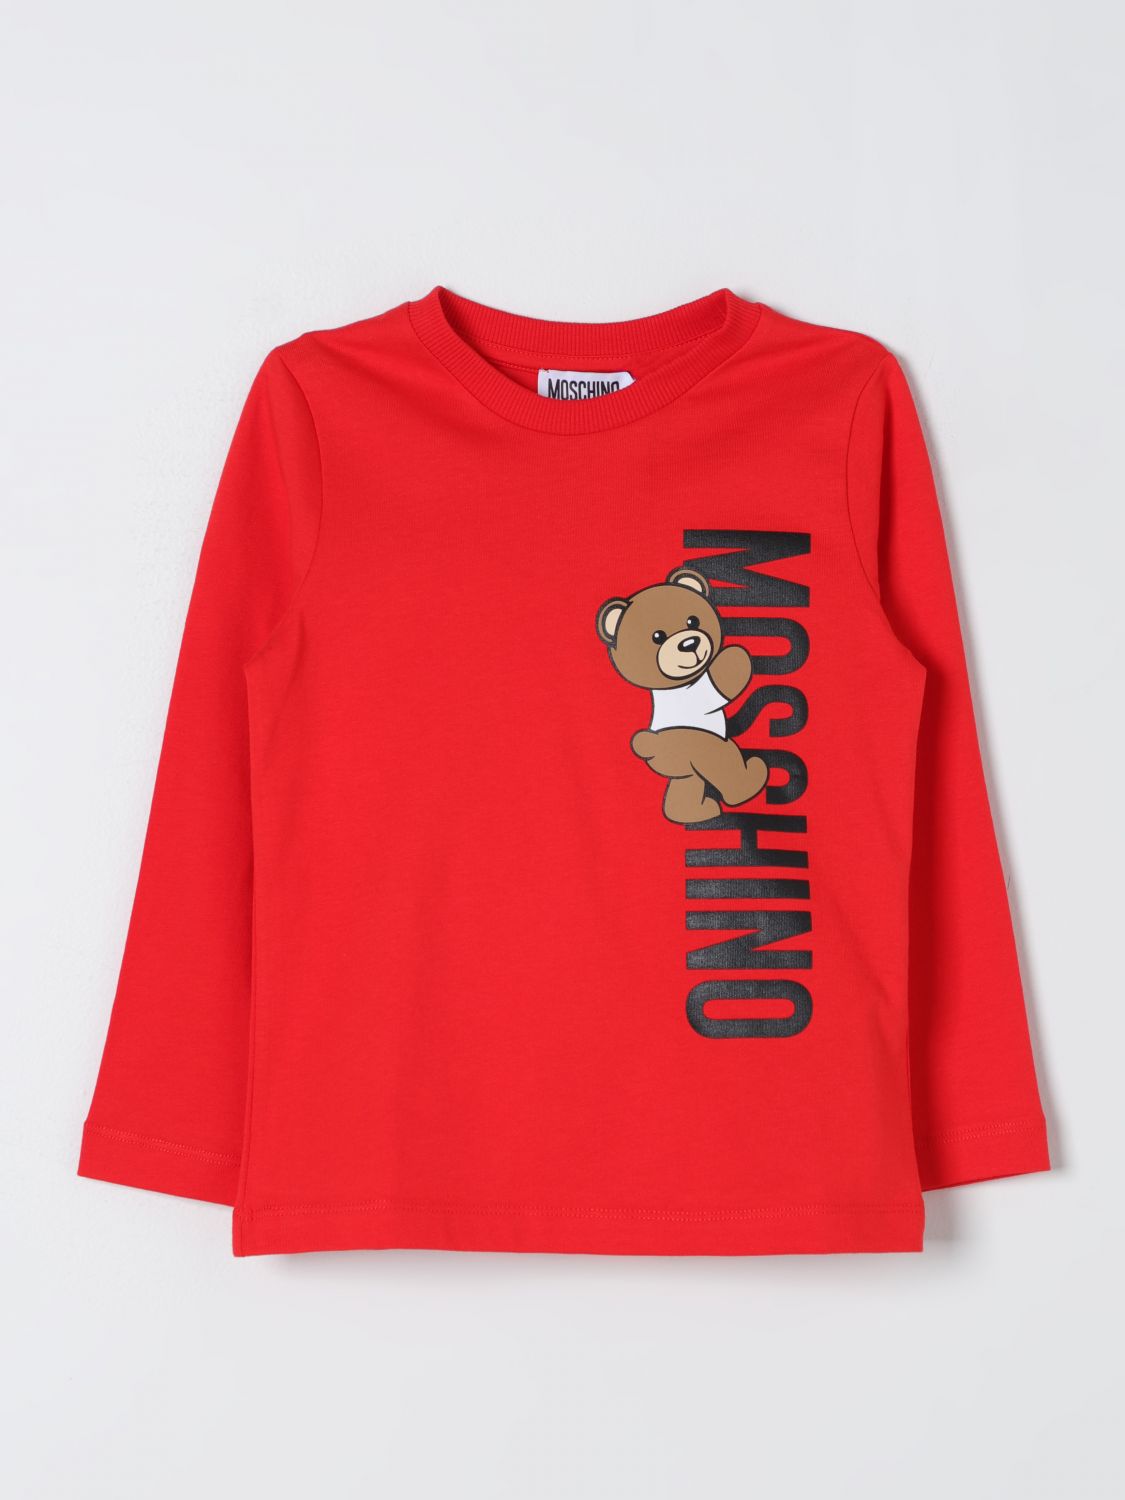 Moschino Kid T-shirt  Kids Color Red